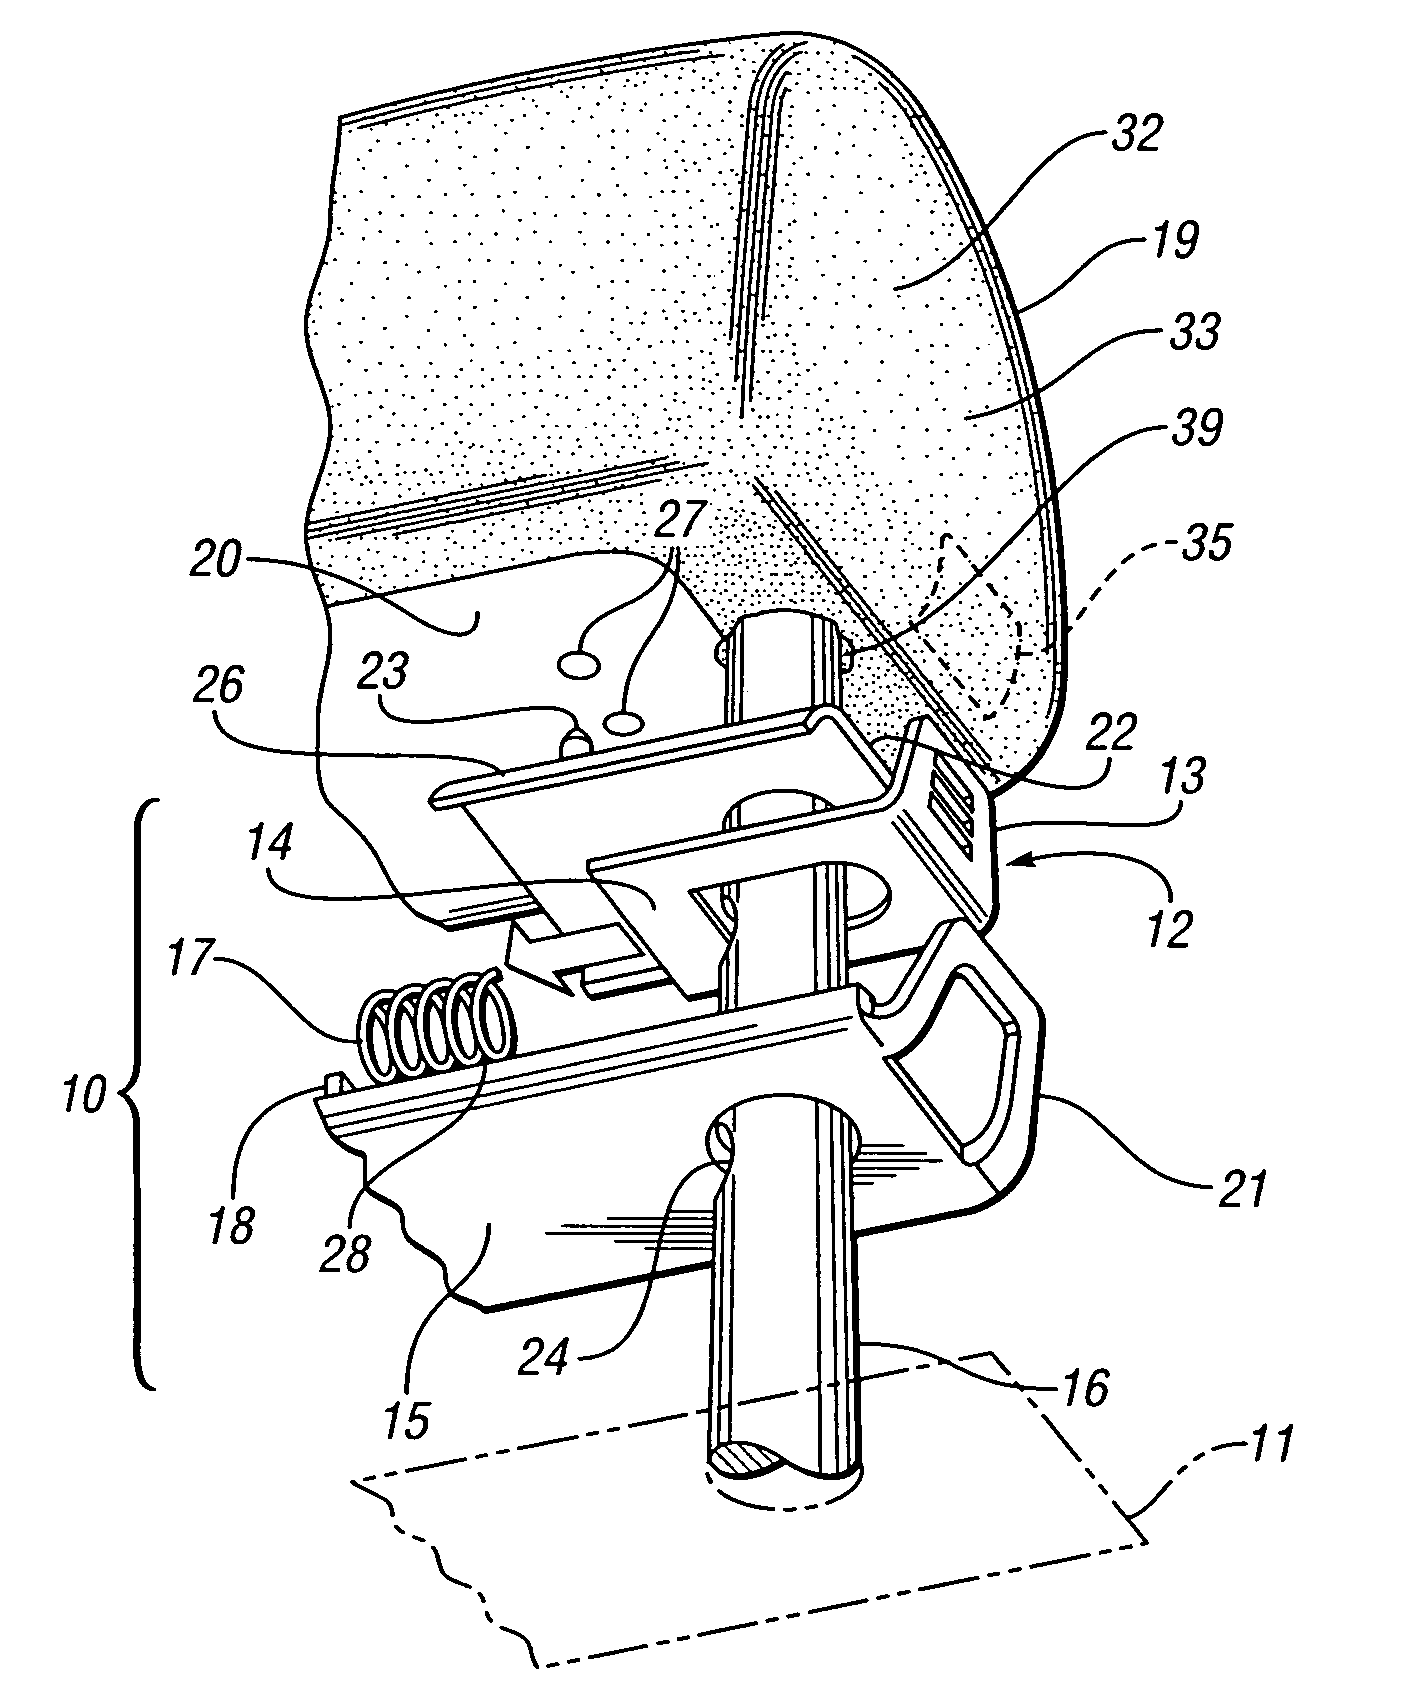 Head restraint adjustment and trim closeout apparatus and method